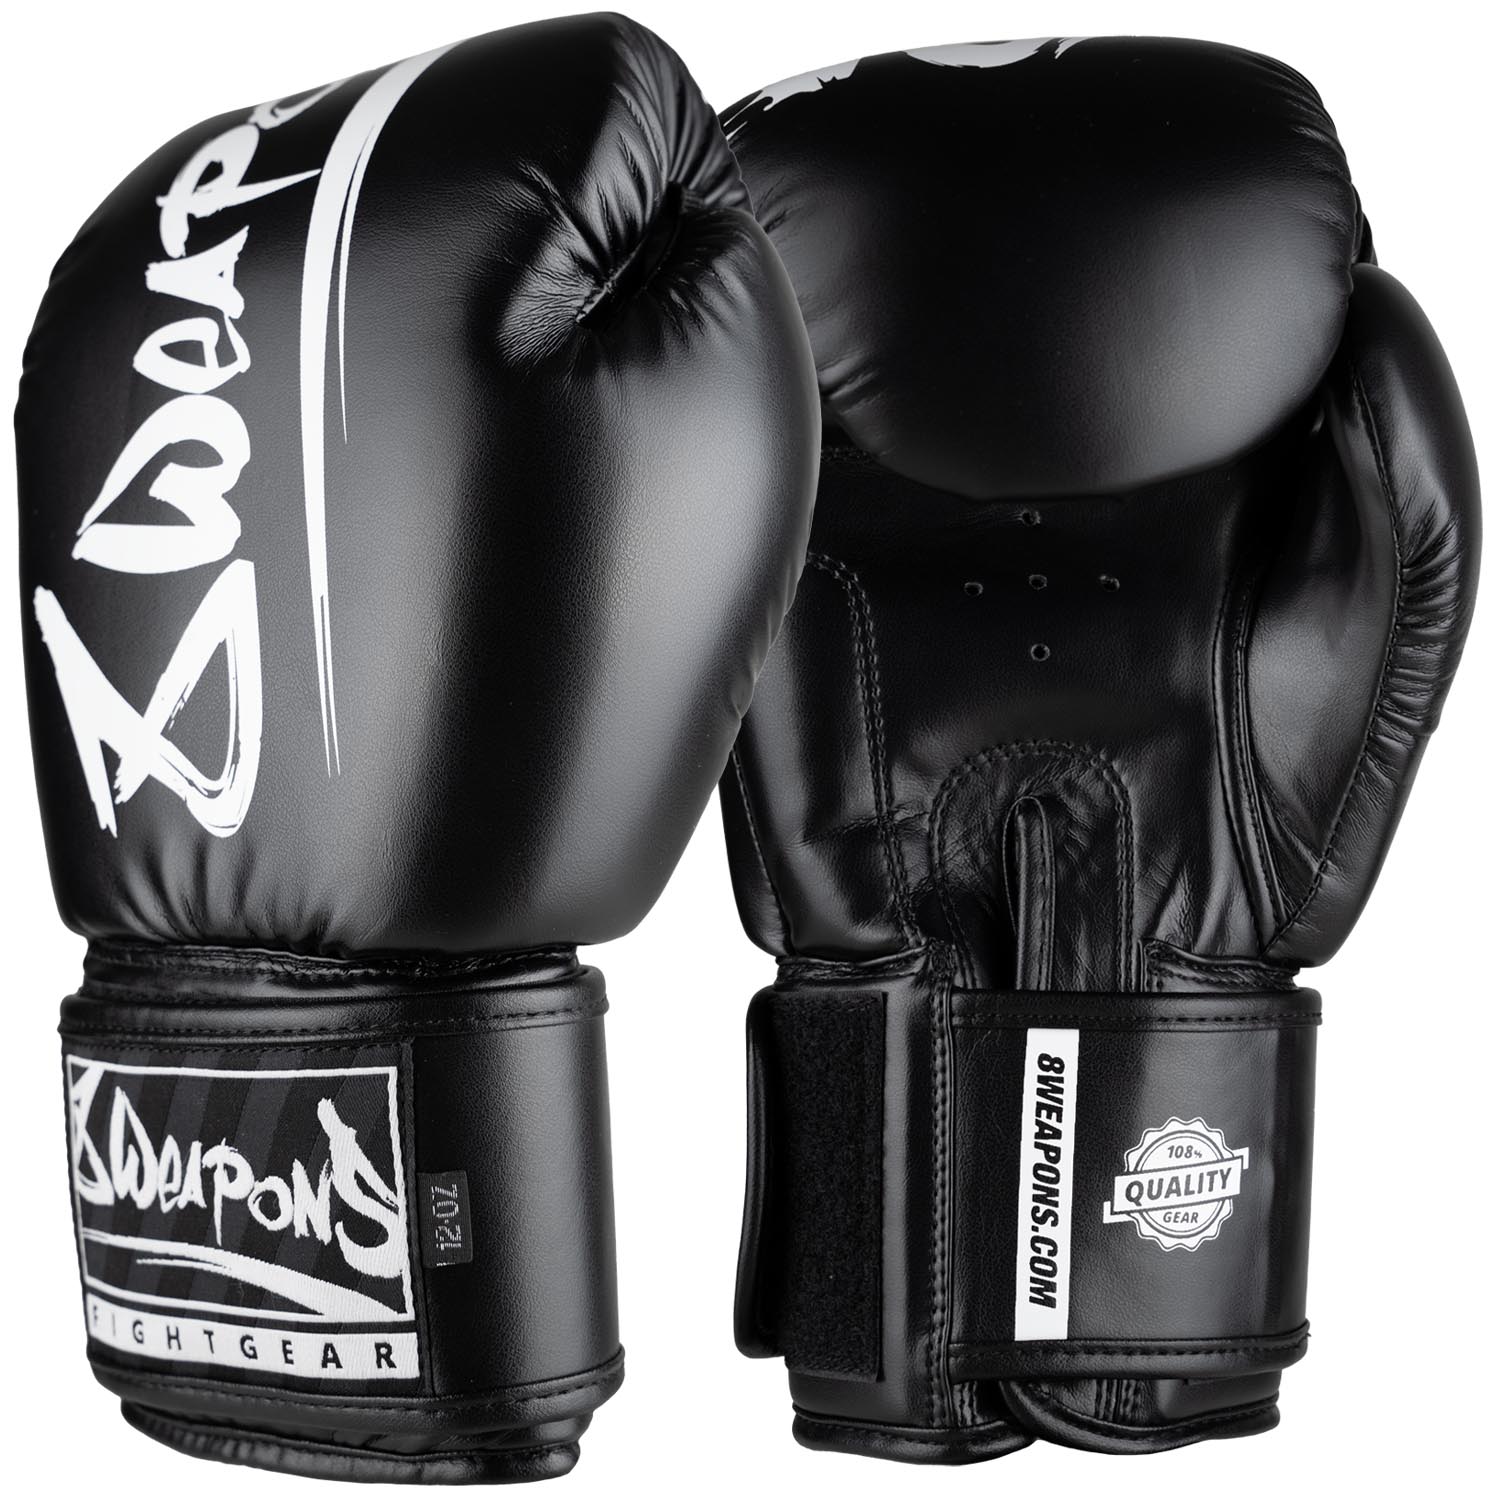 8 WEAPONS Boxing Gloves, Unlimited 2.0, black-white